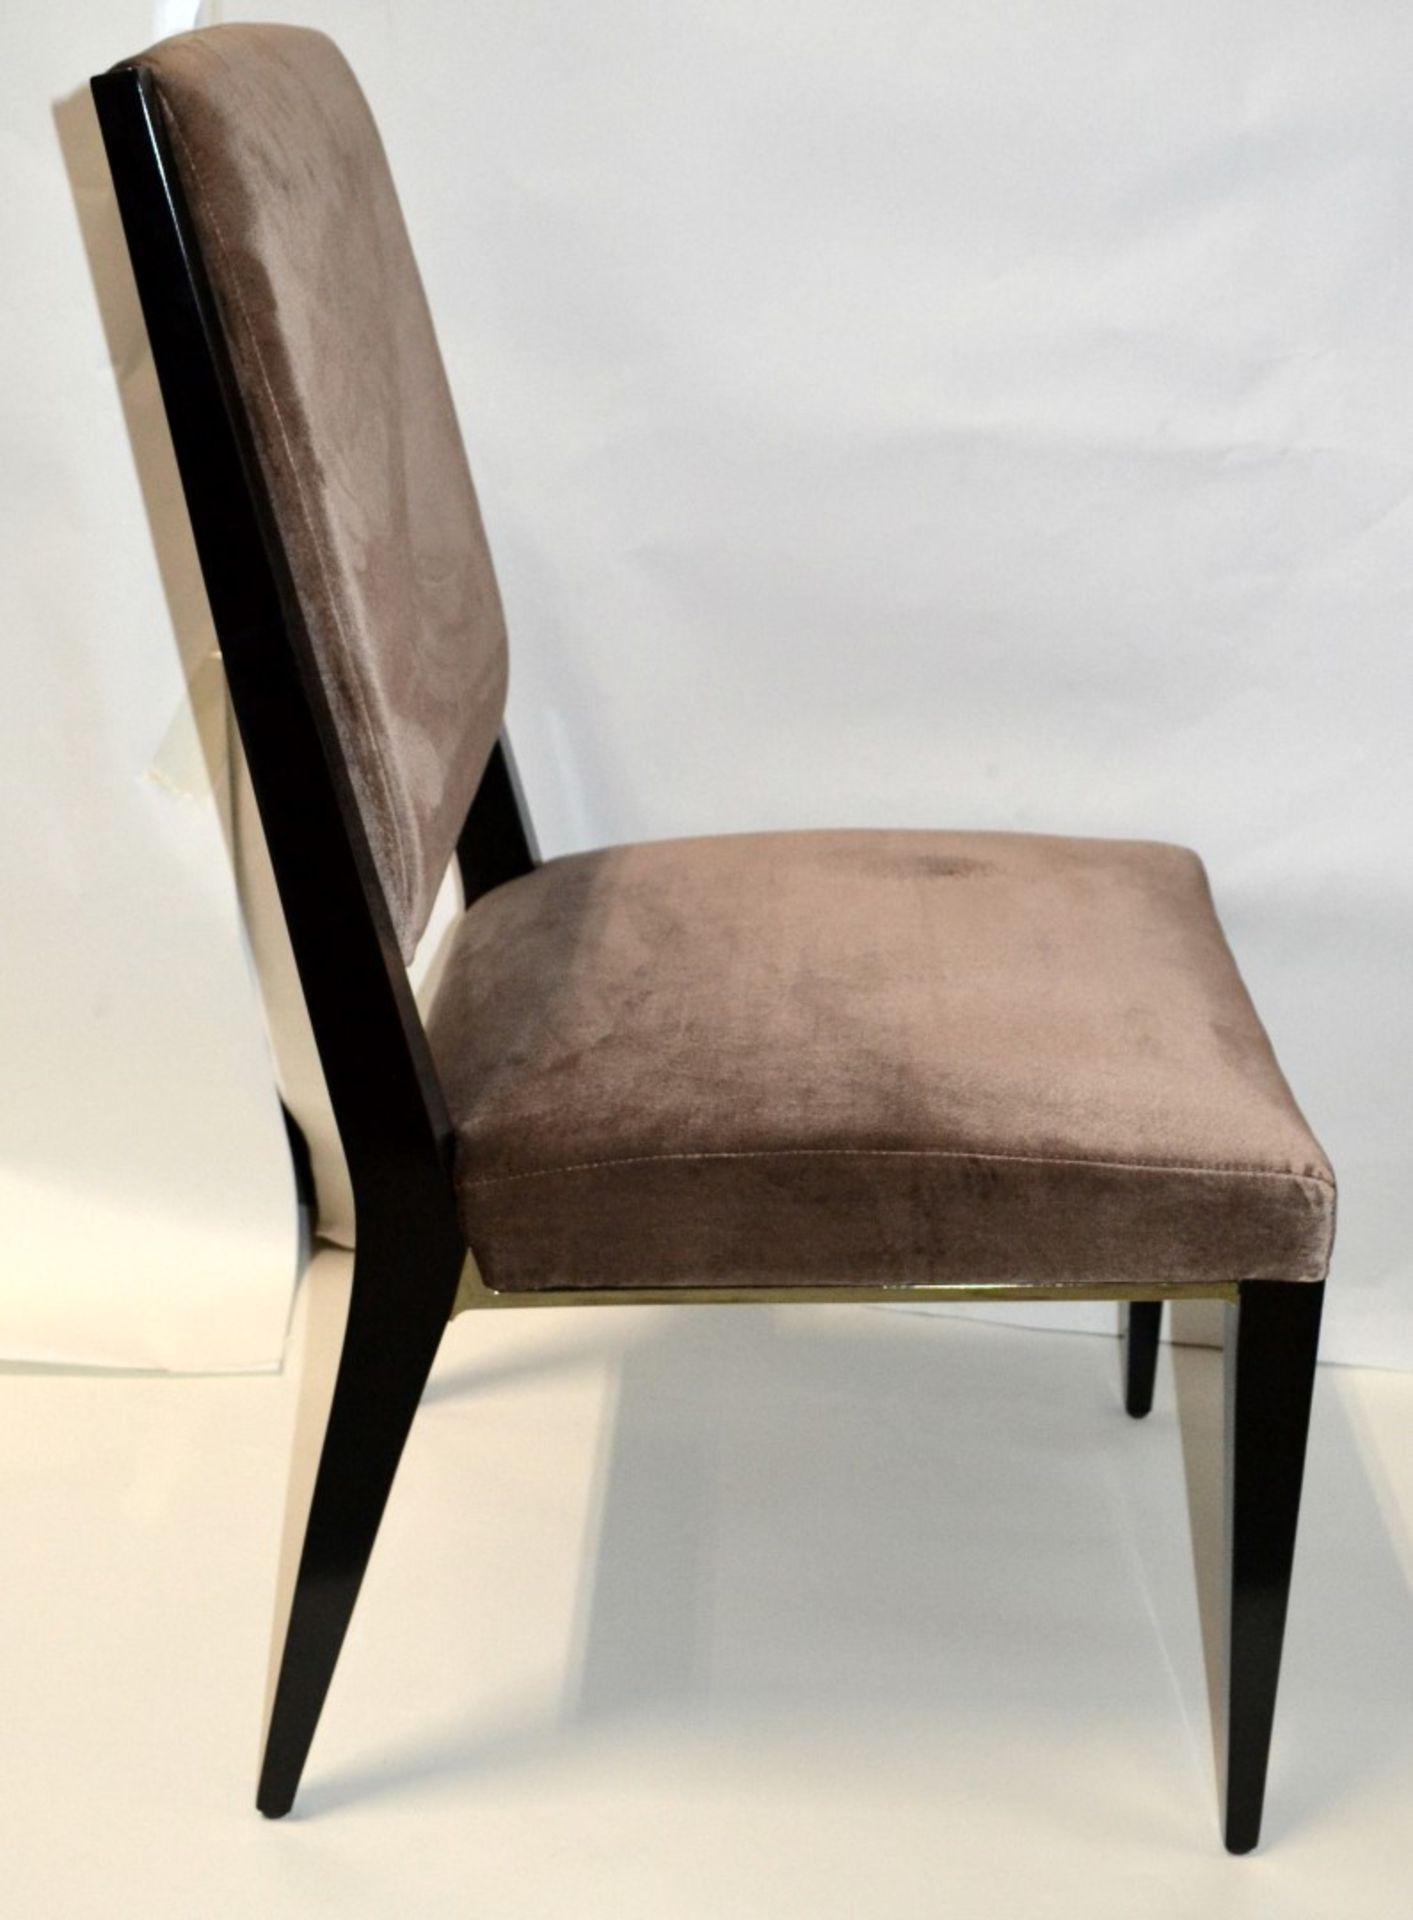 6 x FENDI Stardust Chairs (Art. Ss14/2) - Upholstered In A Rich Mocha Chenille With Brass - Image 2 of 7